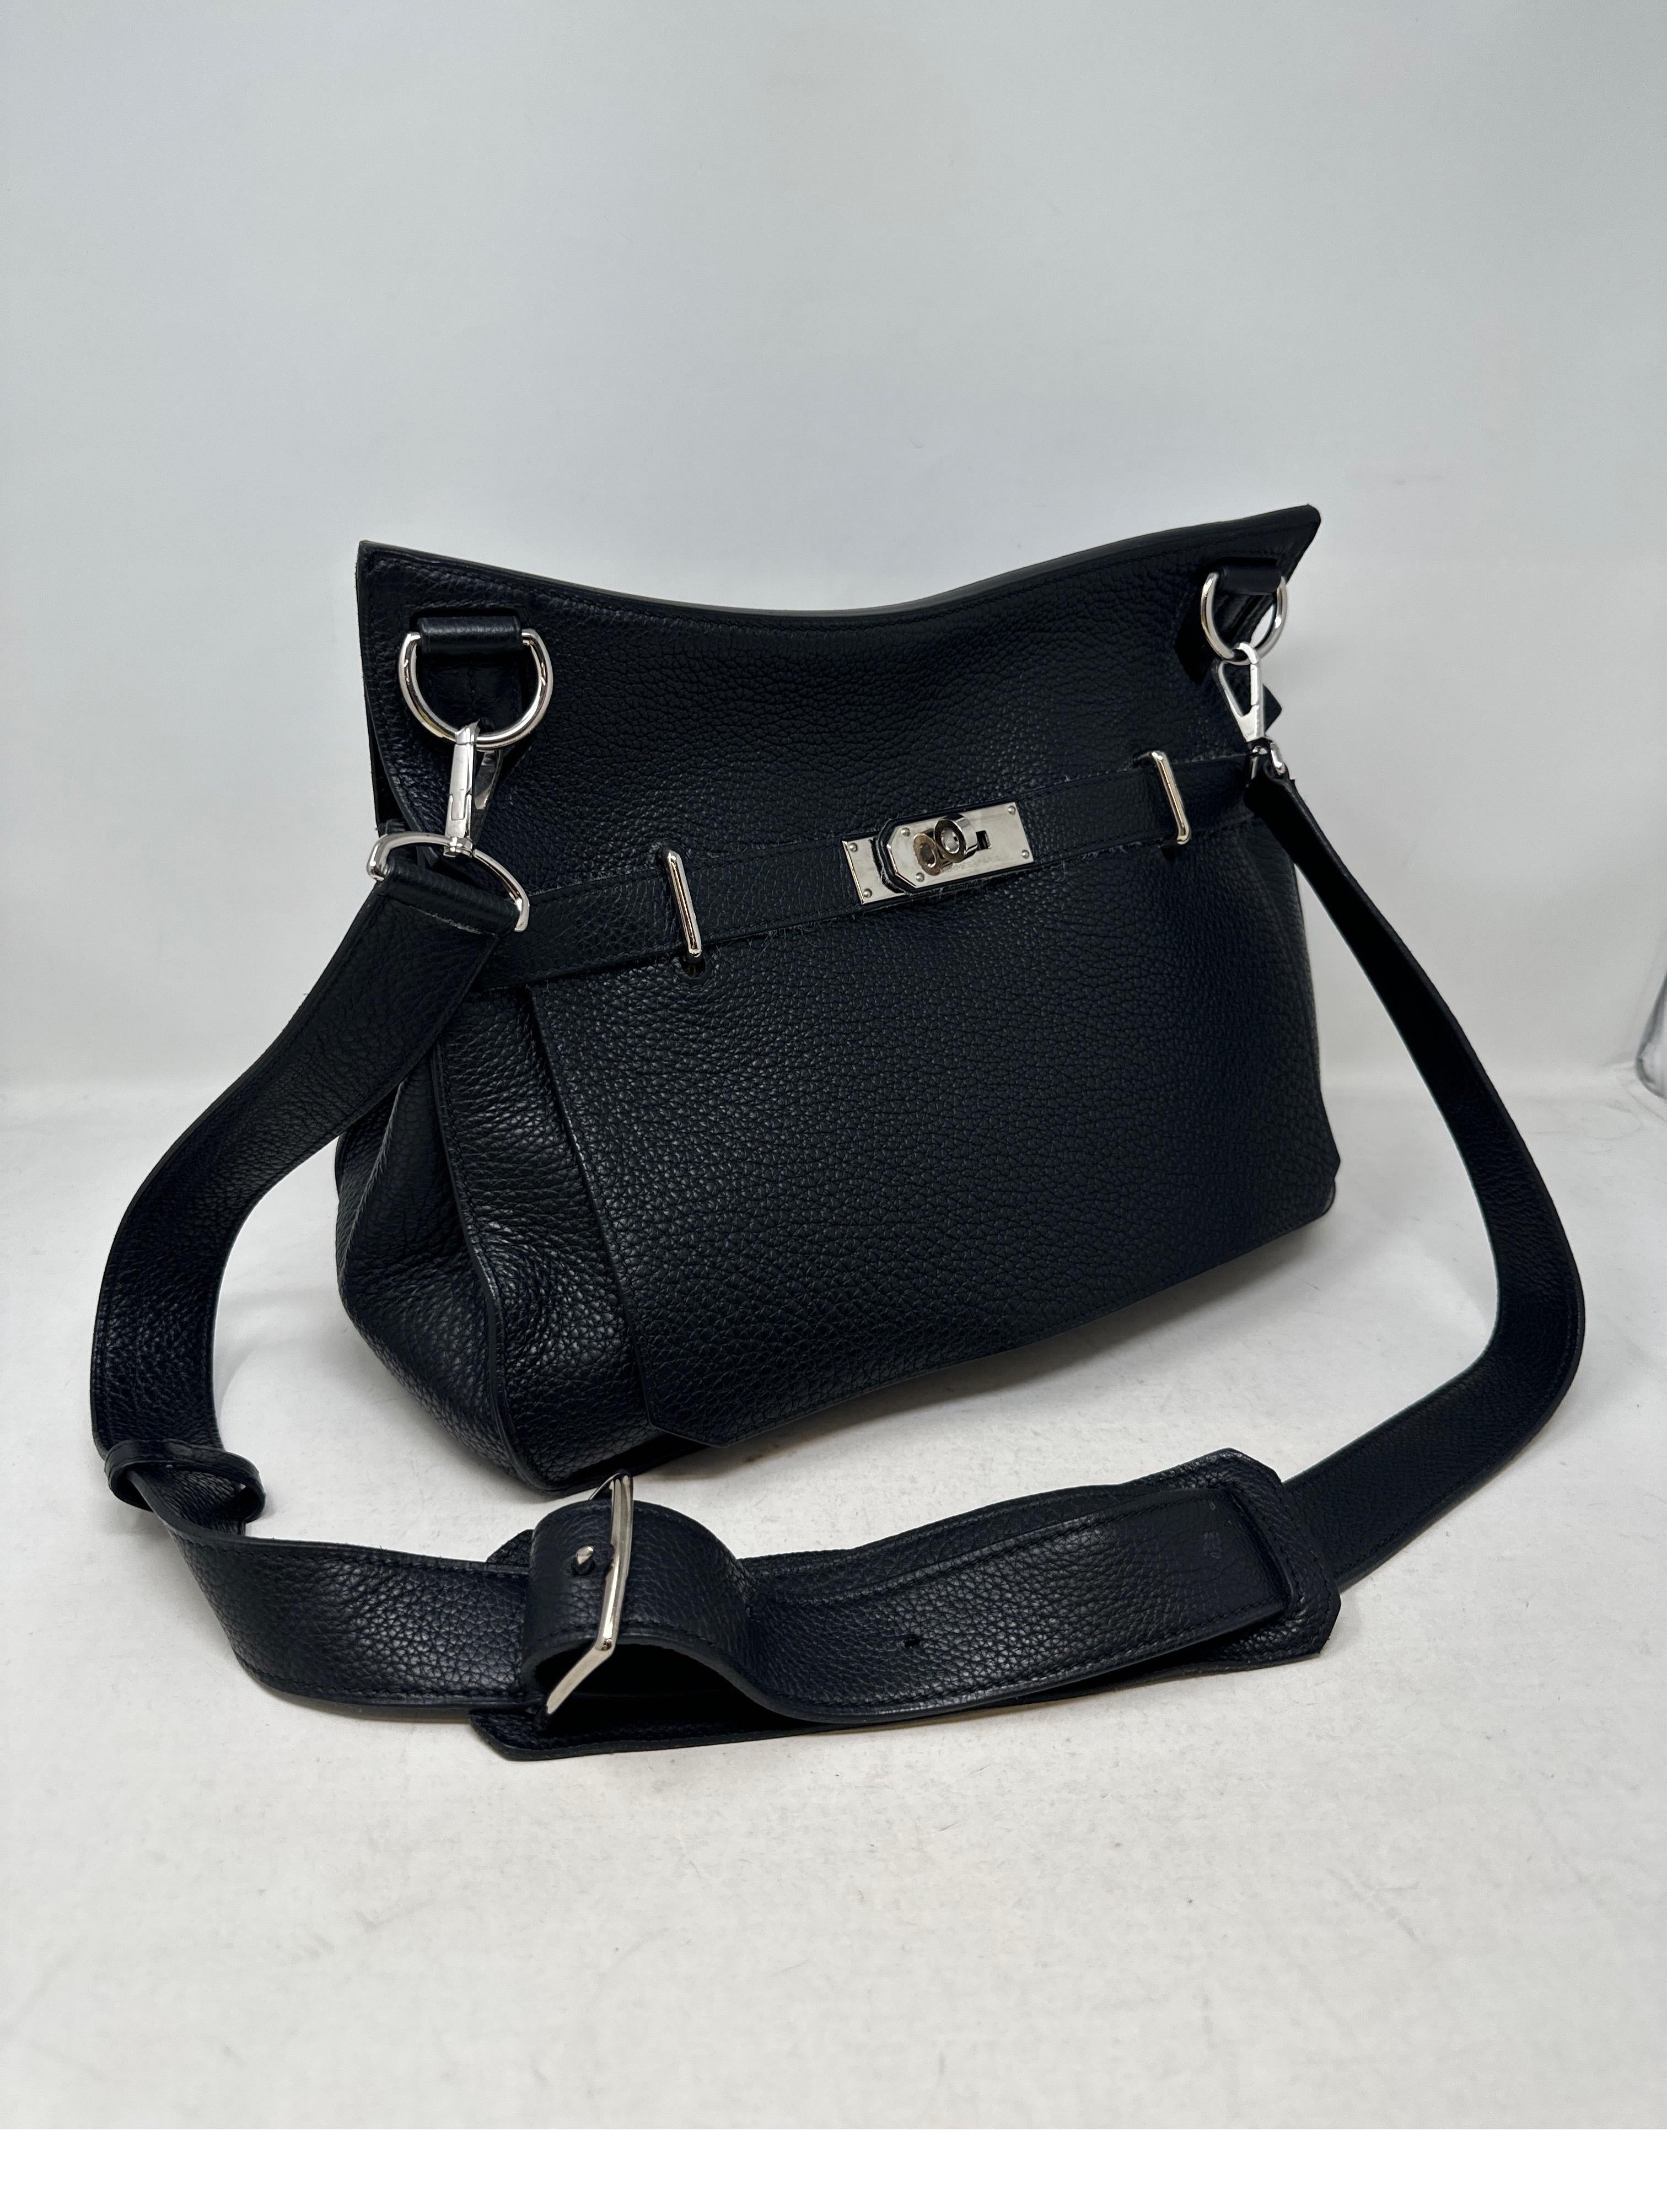 Hermes Black Jypsiere 34 Bag. Crossbody bag. Black leather with silver hardware. Good condition. Light fraying on leather strap. Very light wear. Please see photos. Leather strap and interior clean. Great size for travel or everyday use. Guaranteed